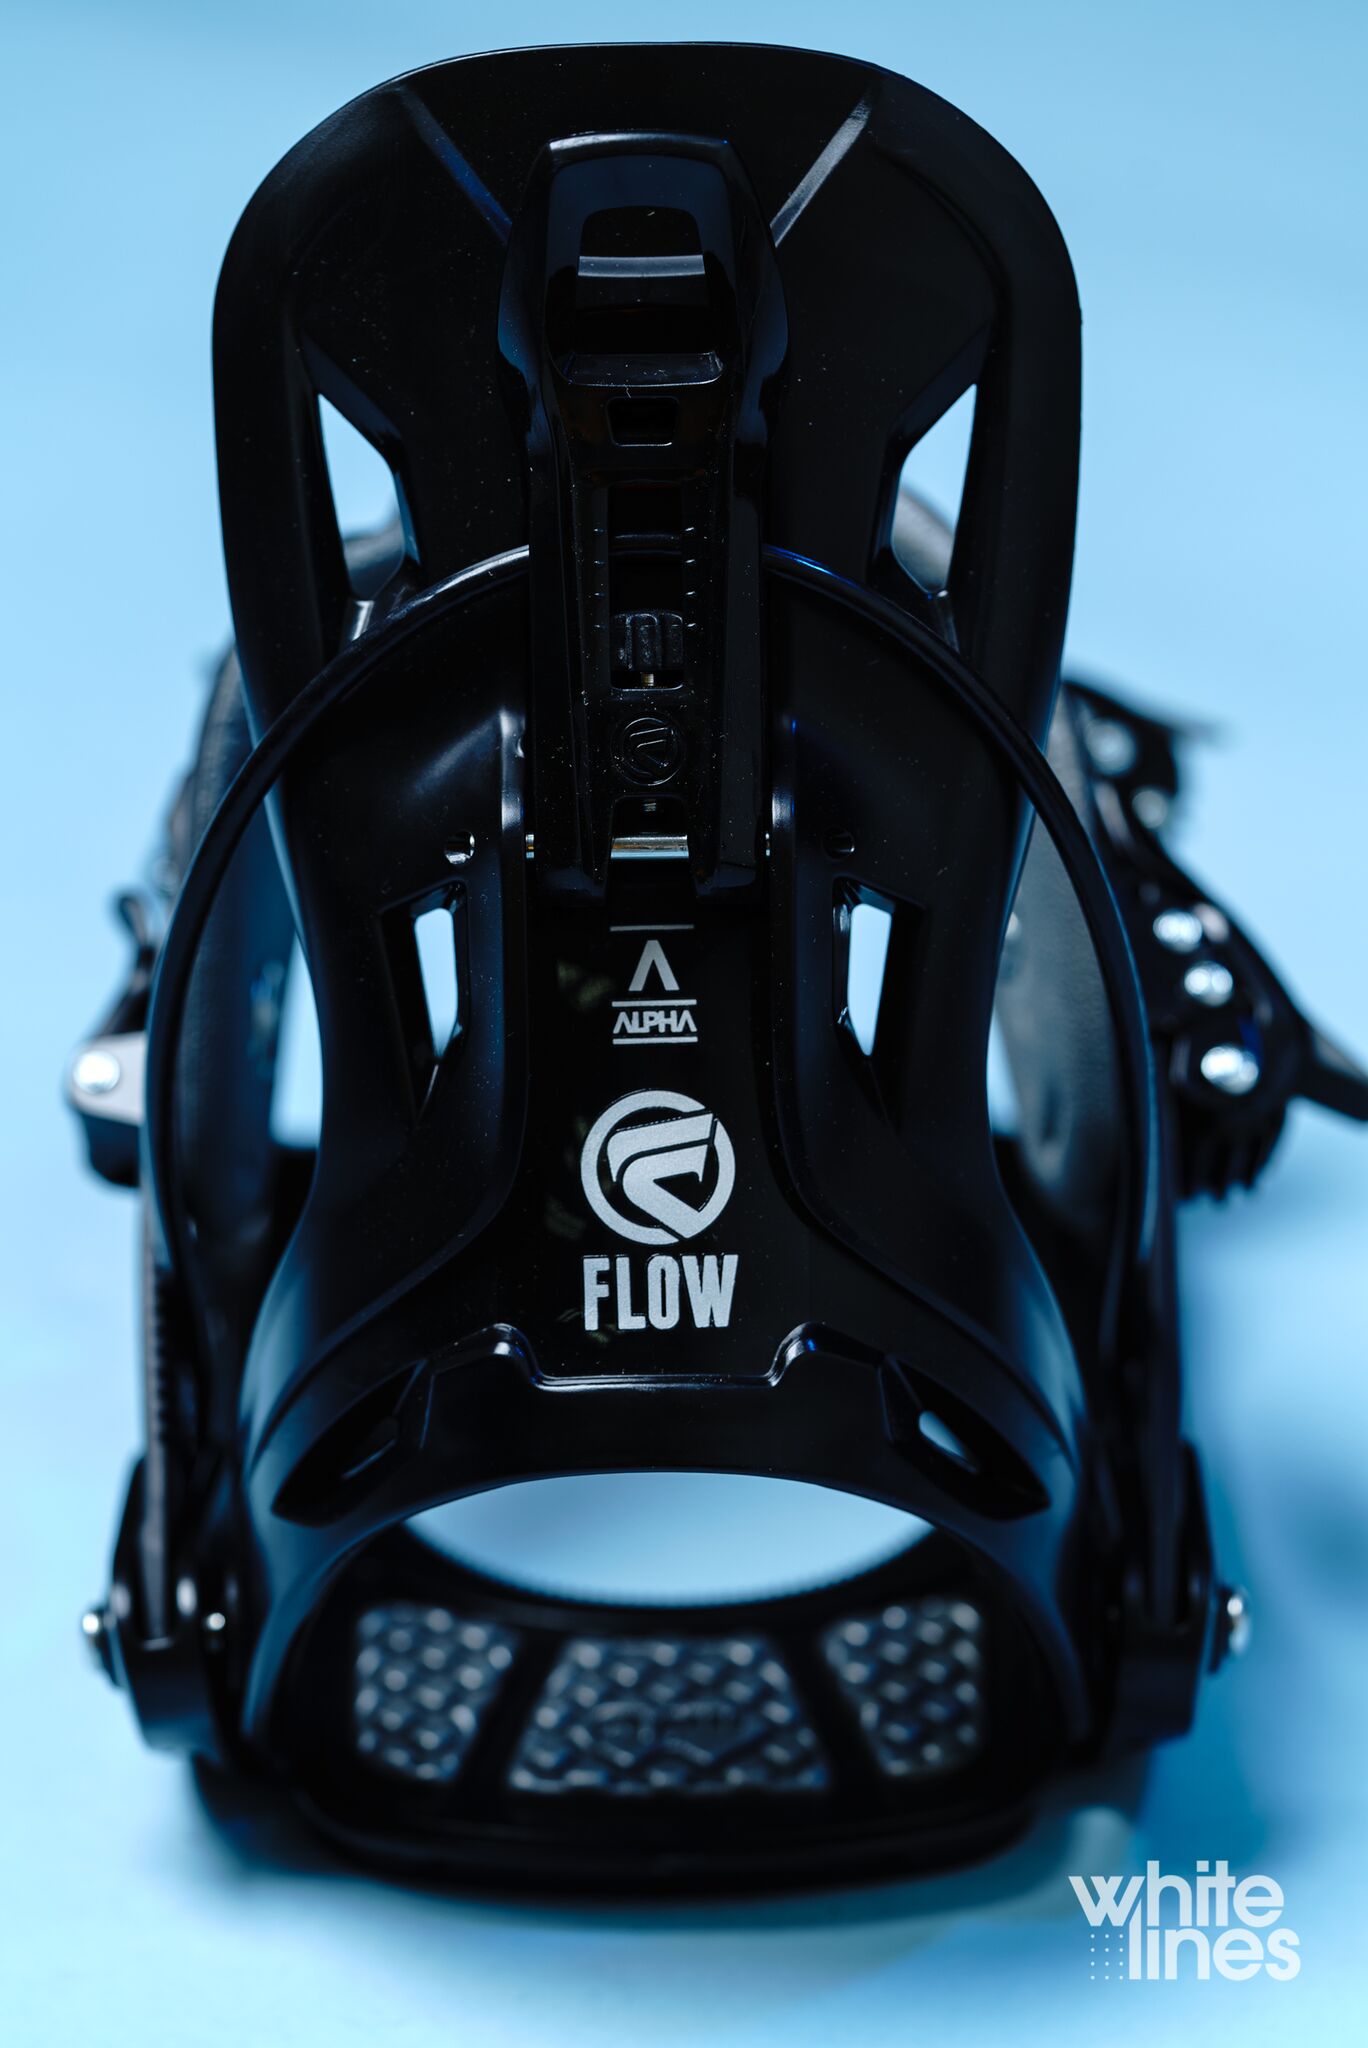 Flow Alpha 2019-2020 Snowboard Bindings Review - Whi